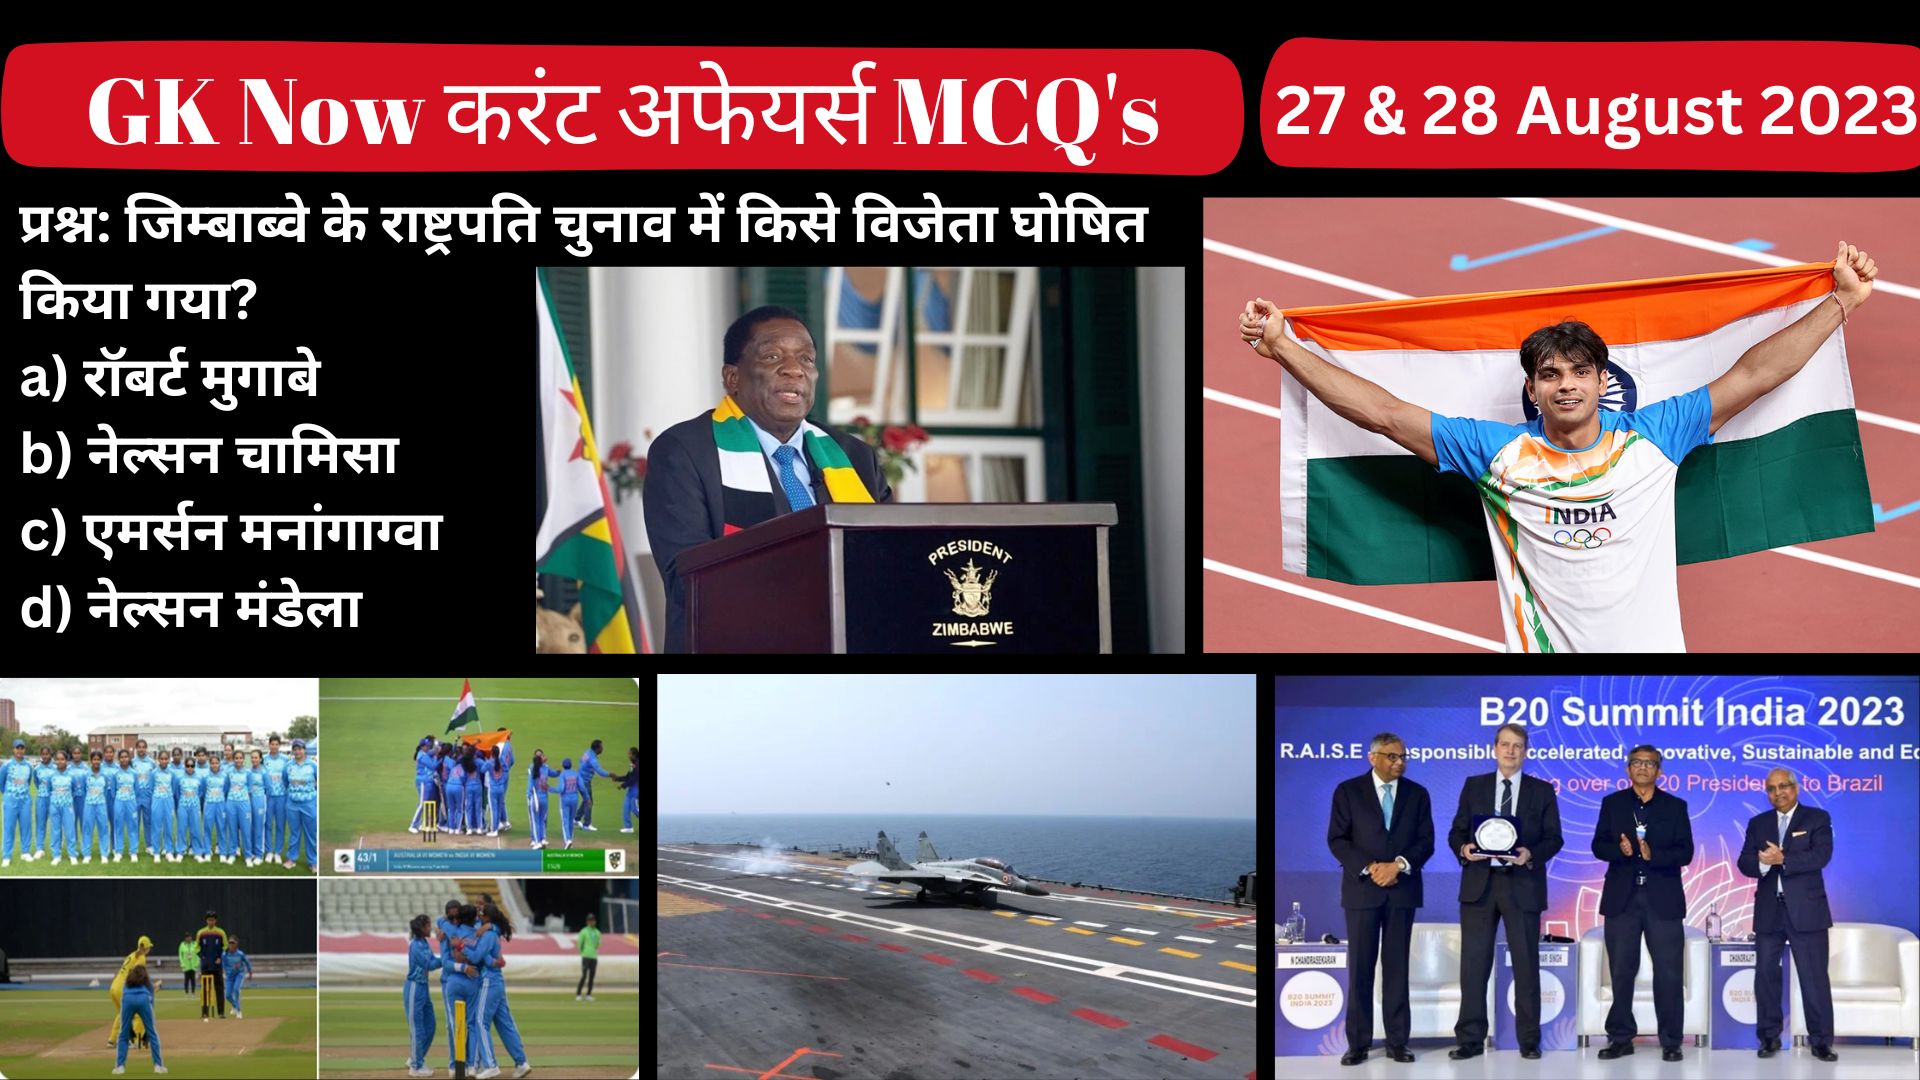 Daily Current Affairs : 27 & 28 August 2023